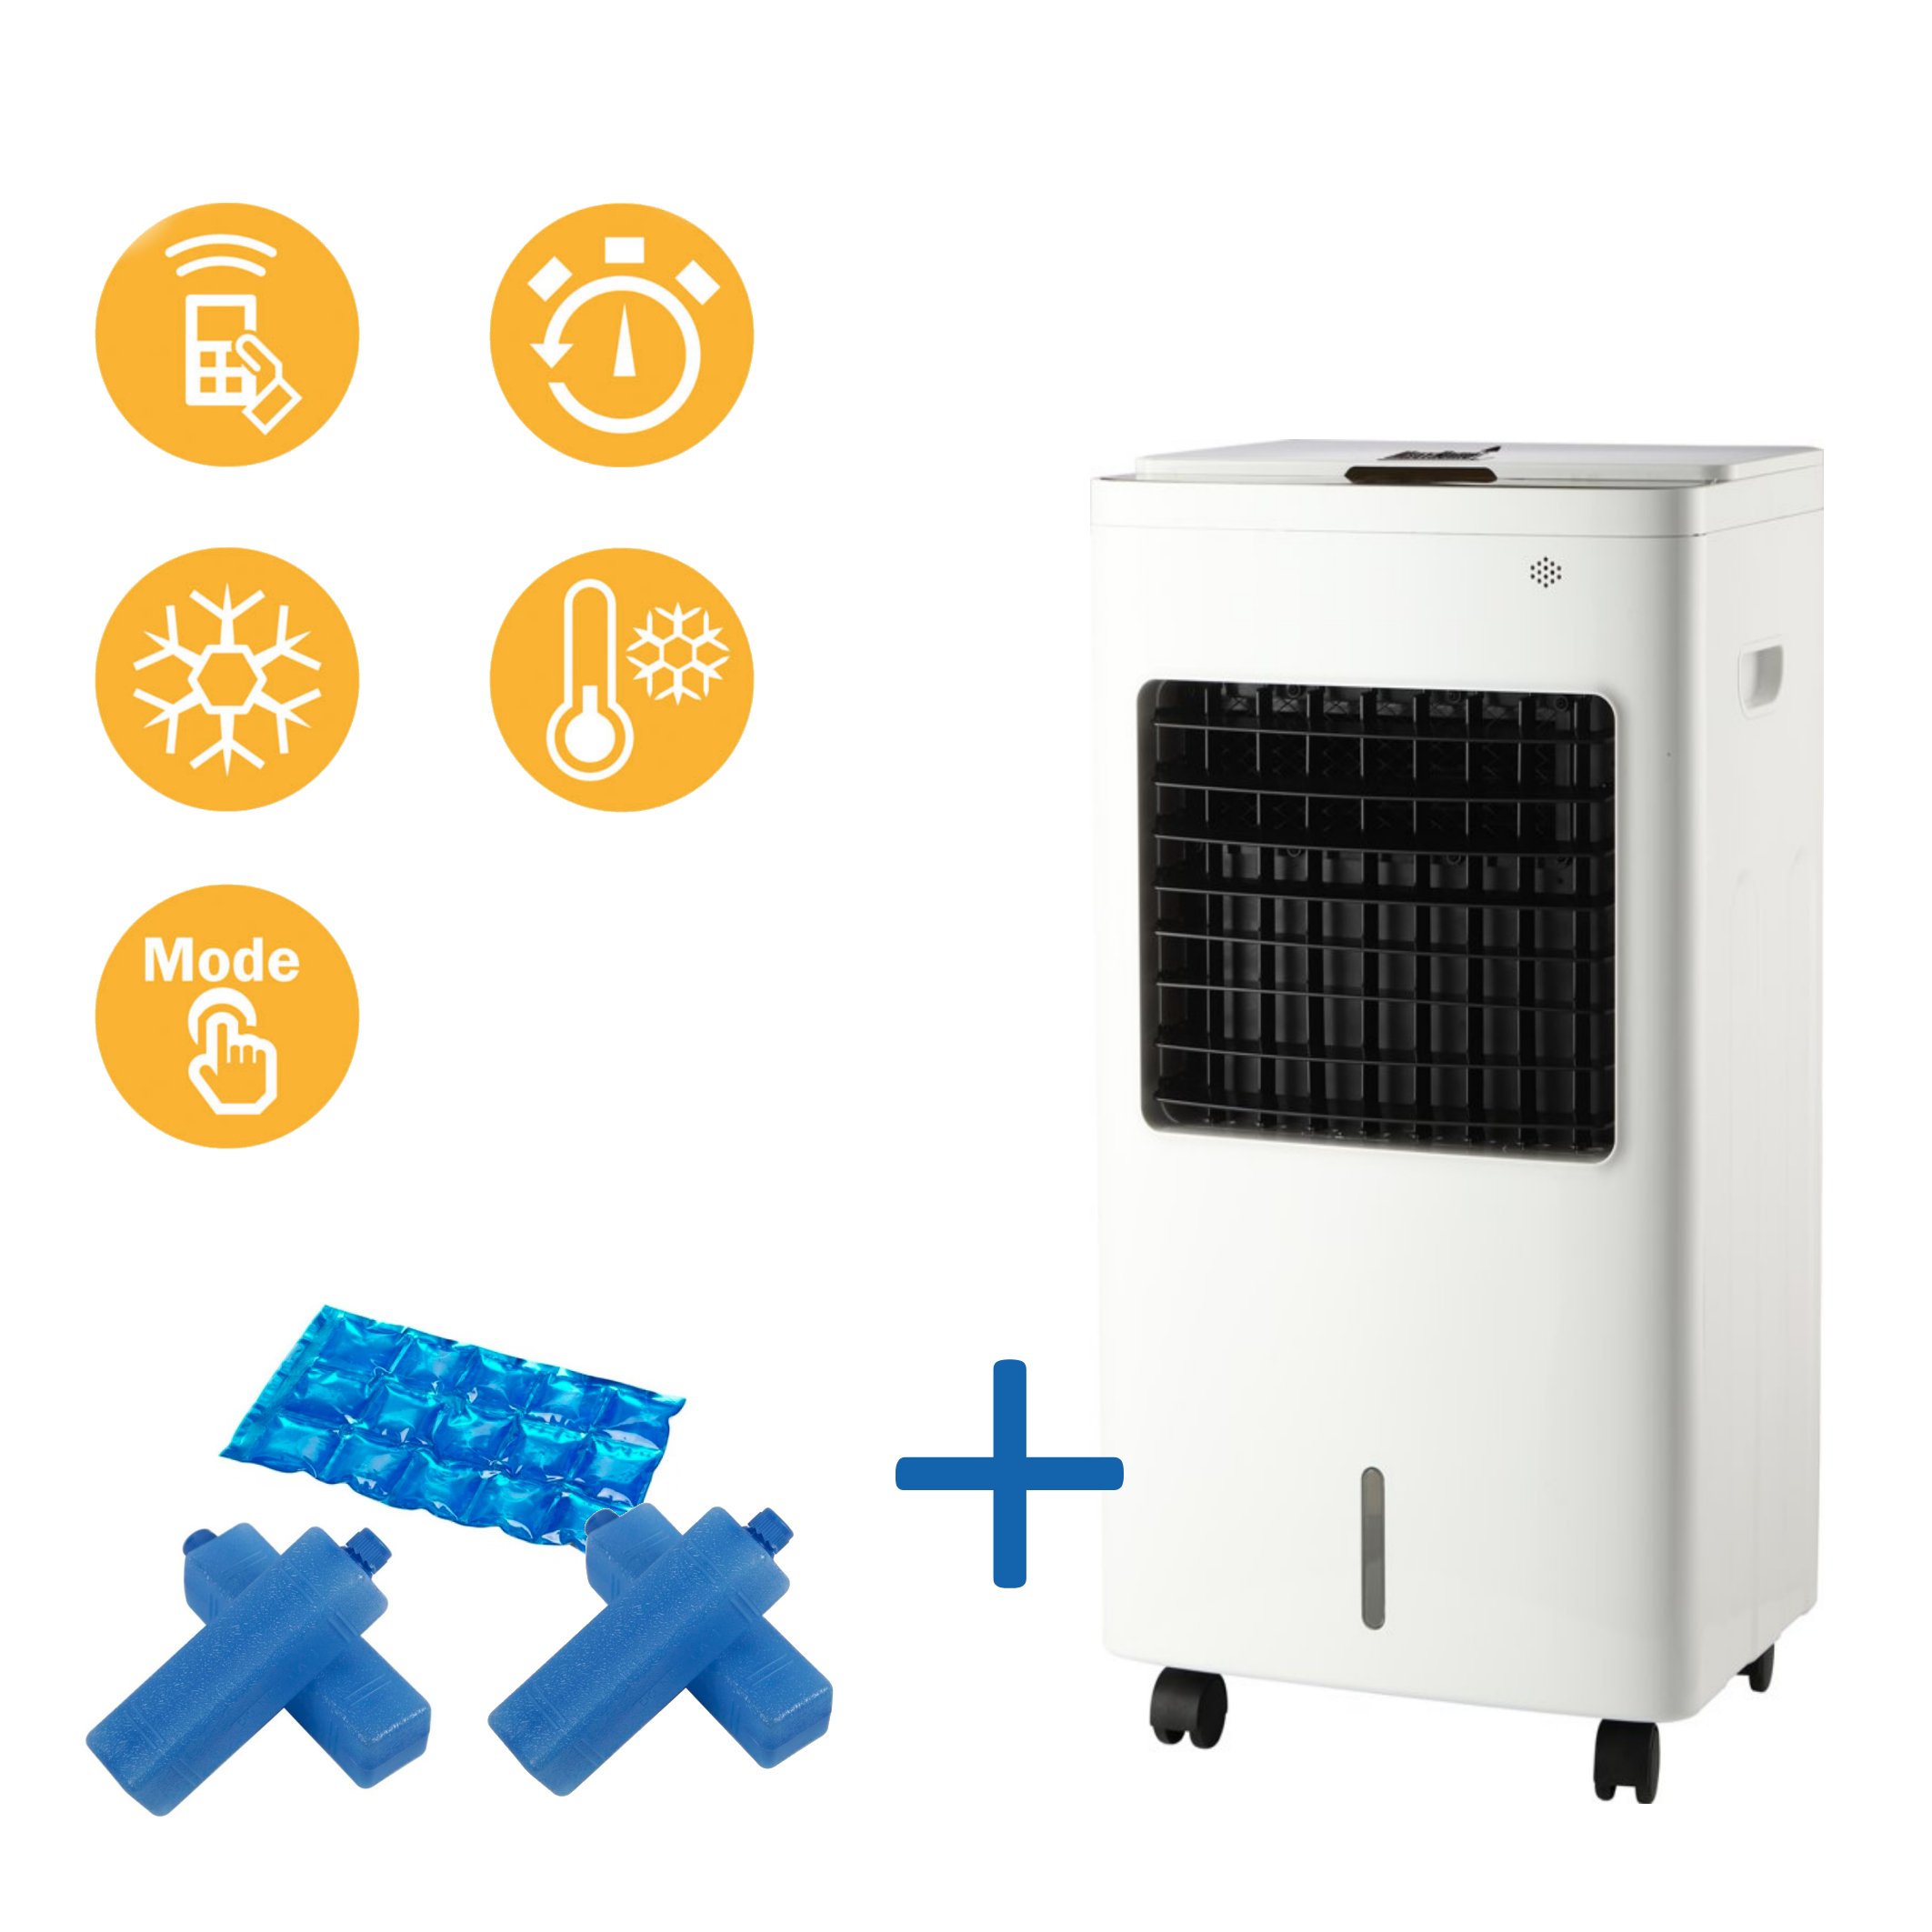 Trouwens Betsy Trotwood Frustratie MaxxHome AC75 Aircooler - Luchtkoeler - Coolstar/ventilator - maxxtools.be